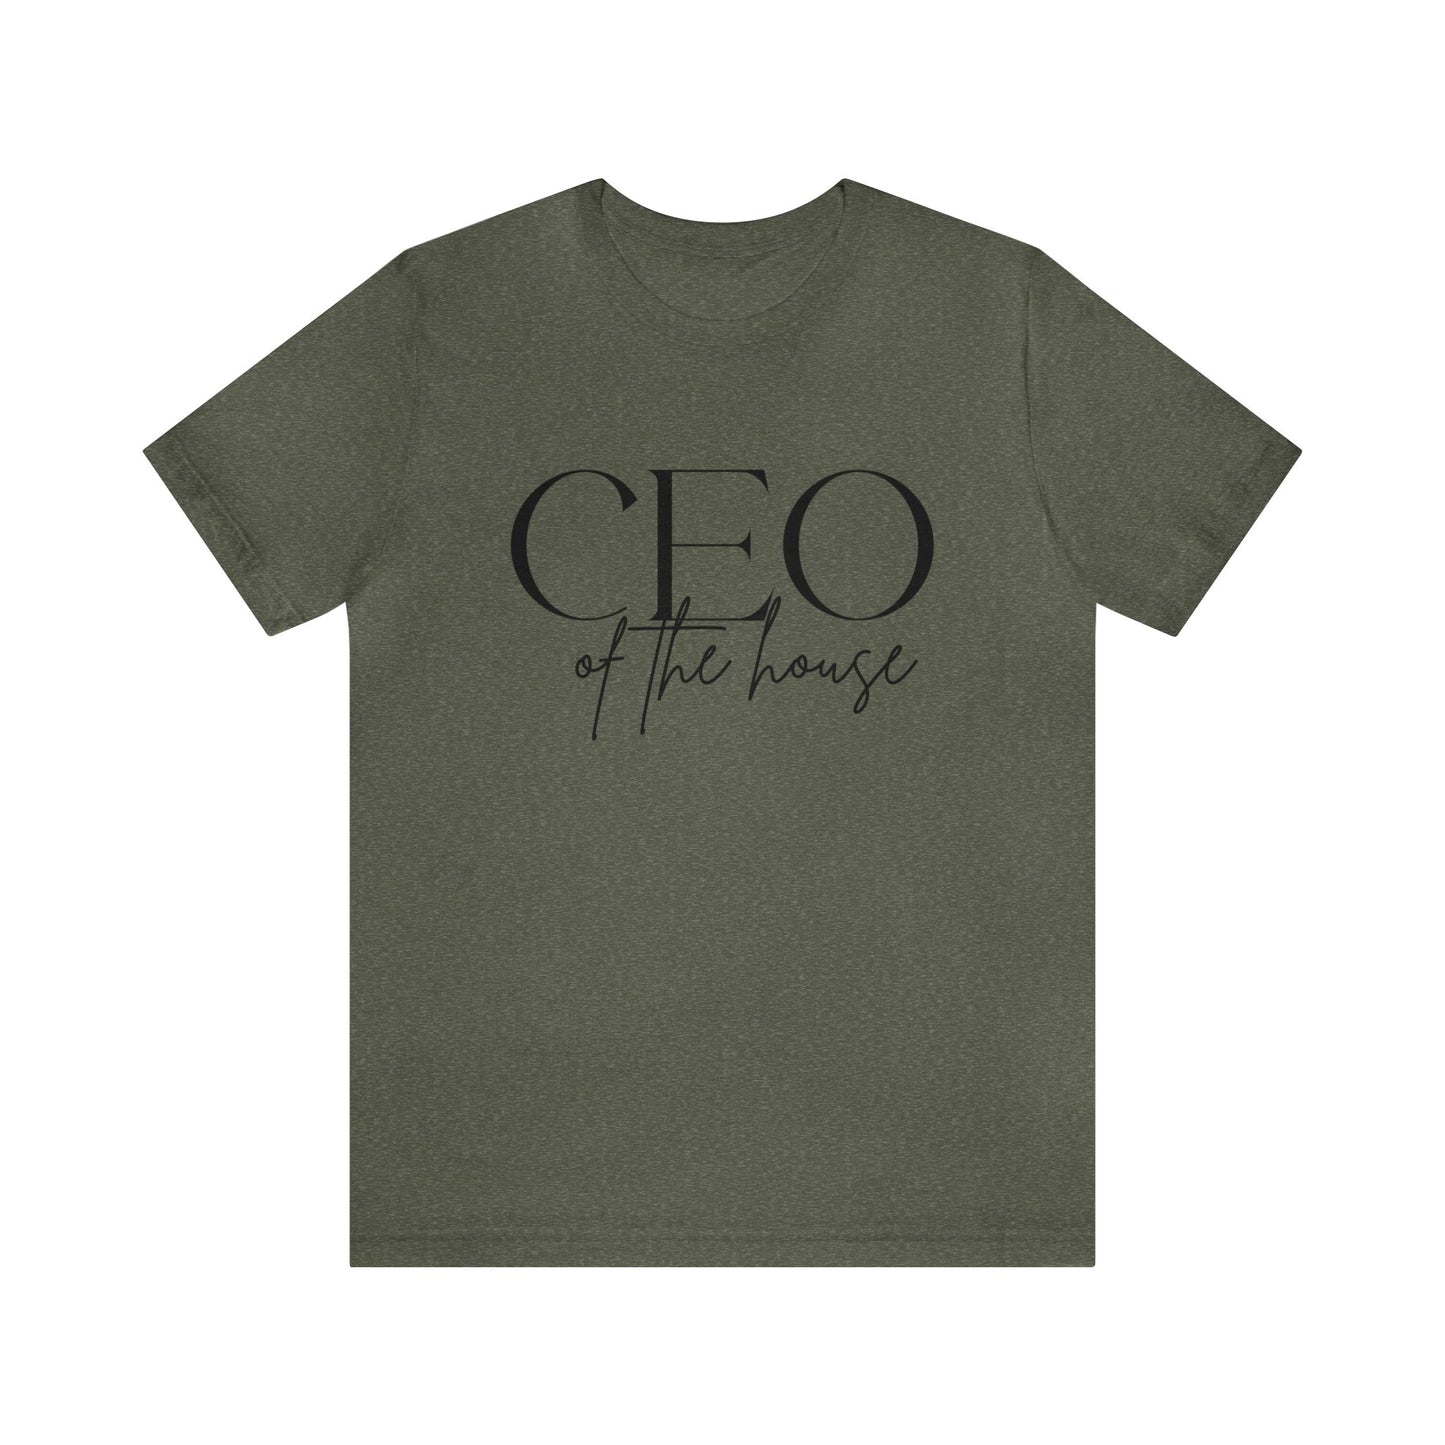 CEO of the house Tshirt